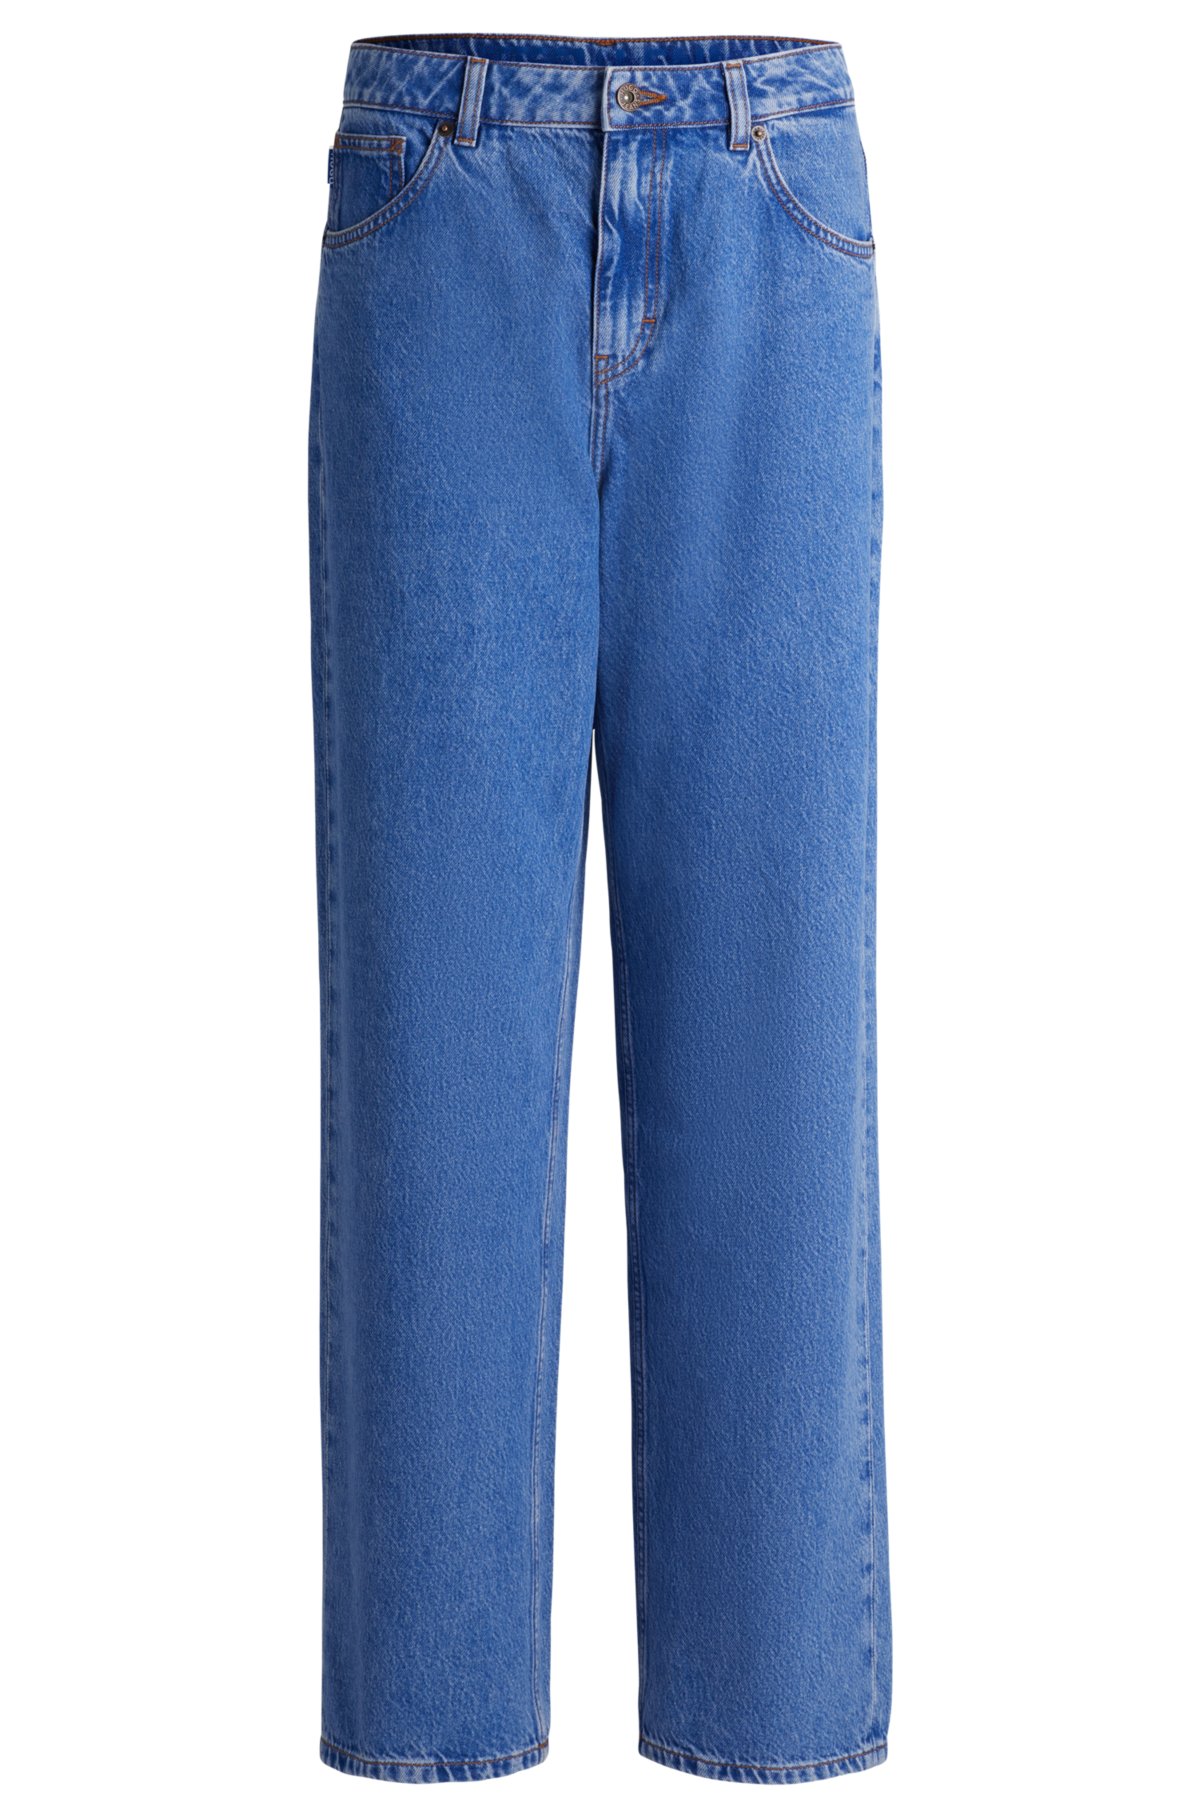 Relaxed-fit jeans in blue stonewashed denim, Blue